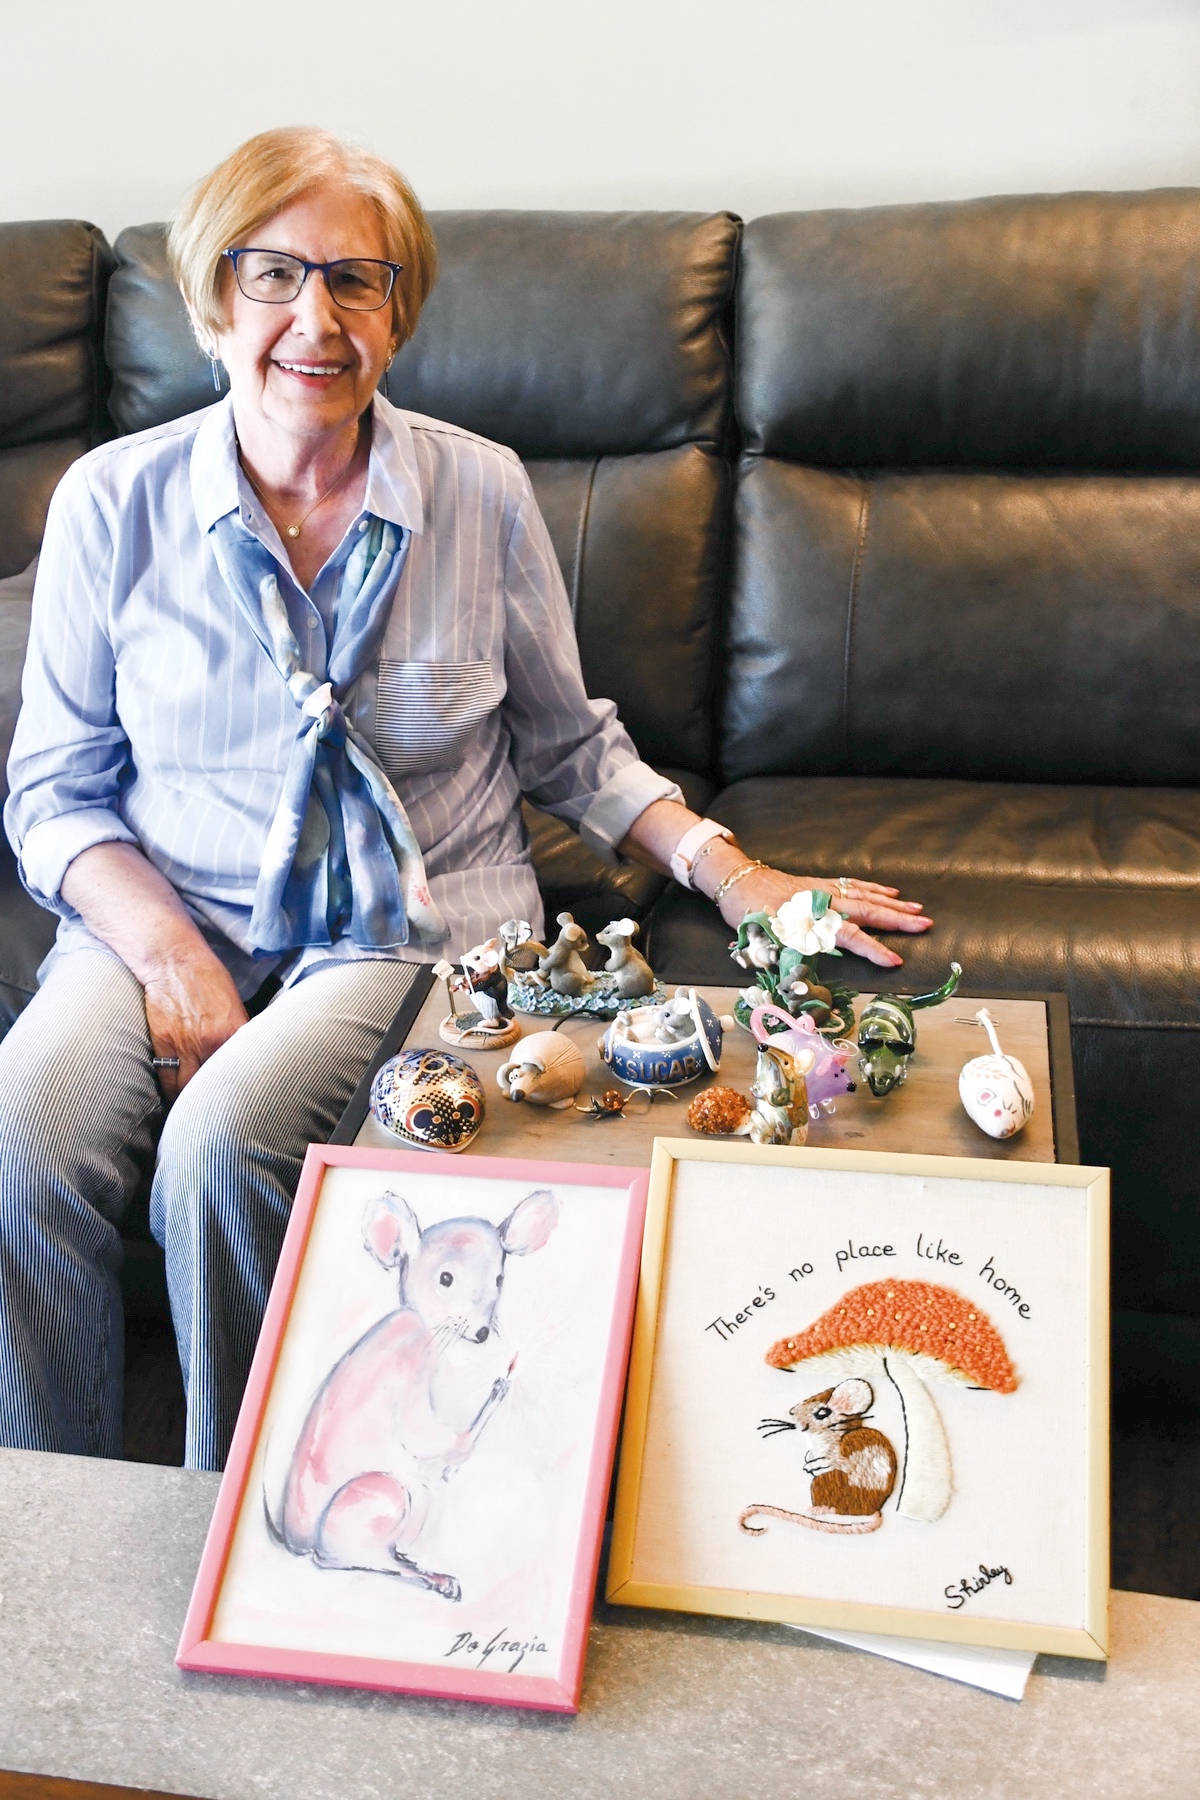 Shirley Kroot doesn’t mind a few mice her house. In fact, she collects them!